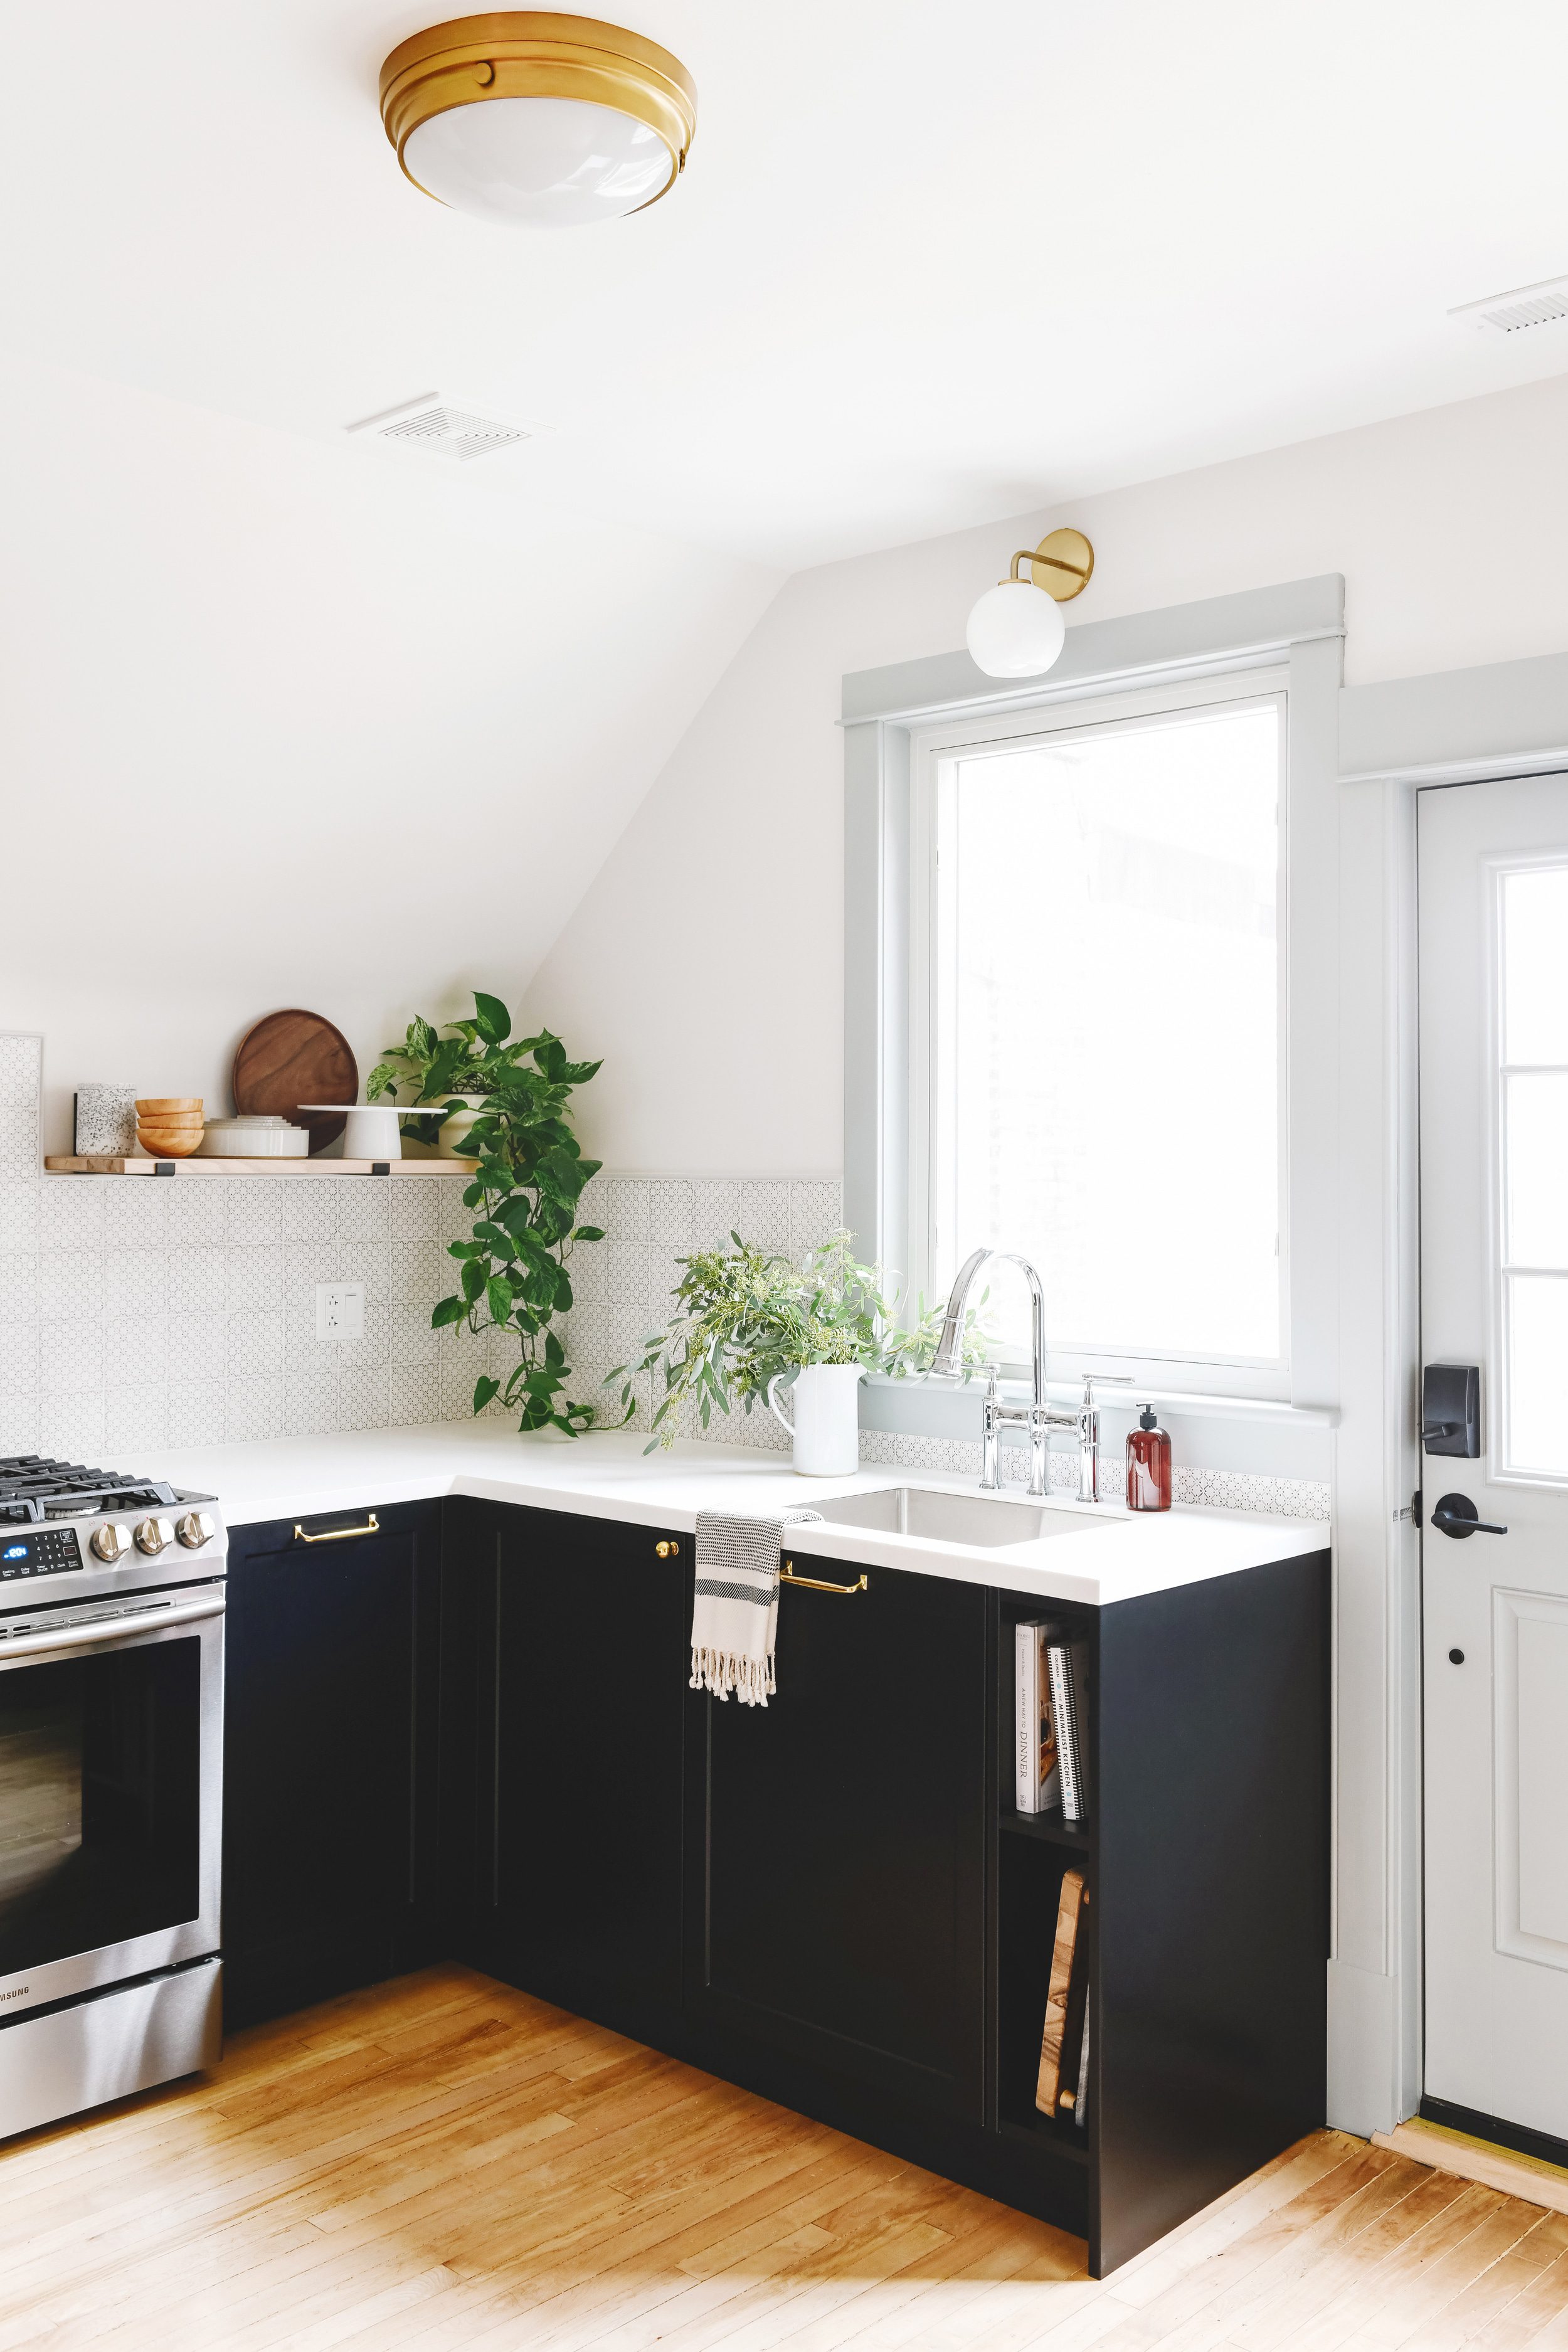 A small kitchen with black lower cabinets, gray-blue upper cabinets and floating shelves | via Yellow Brick Home